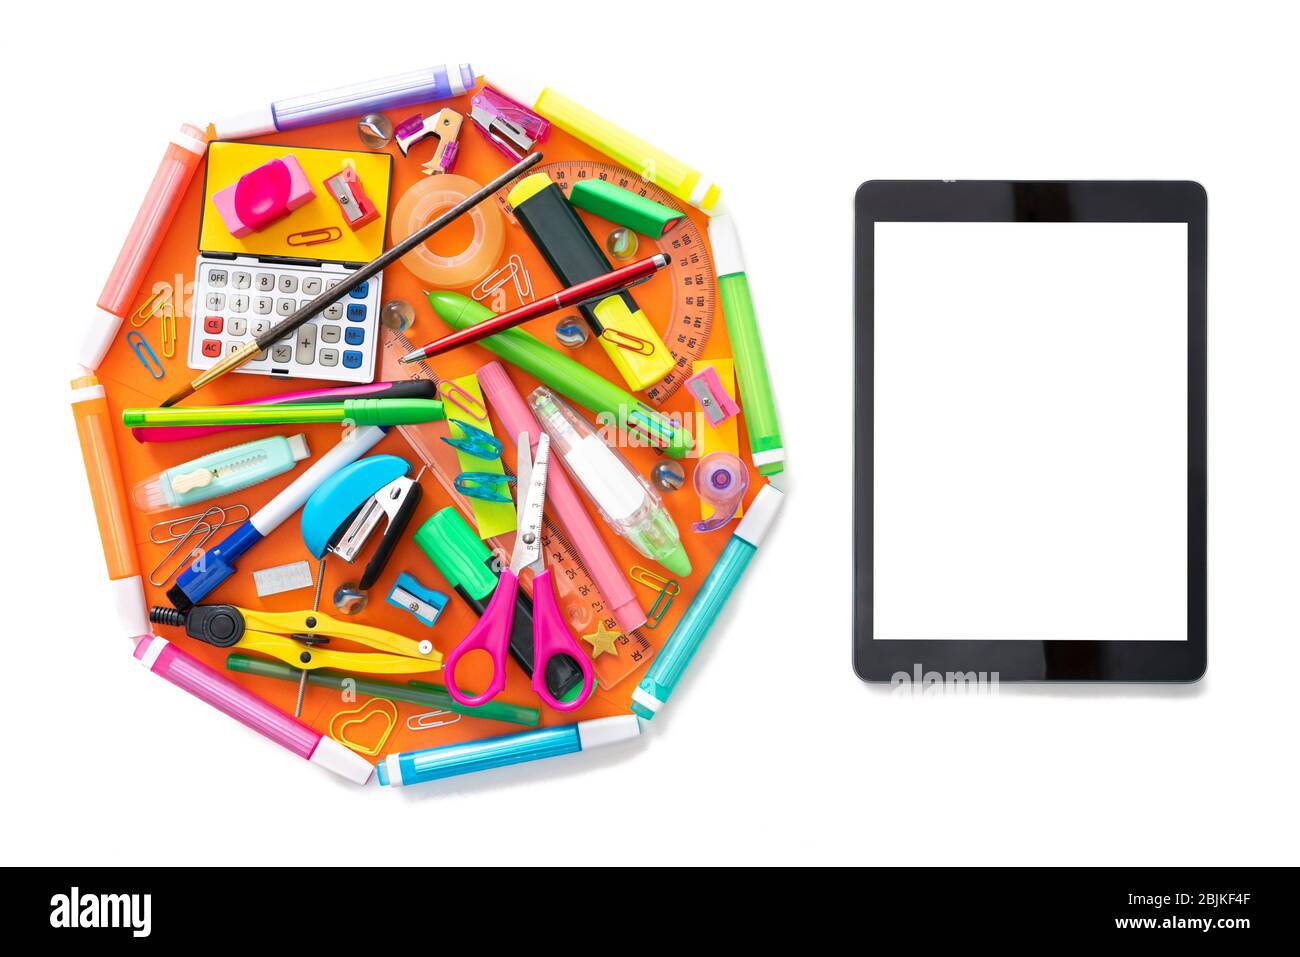 E-learning online learning with tablet PC and school supplies isolated on white. Stock Photo